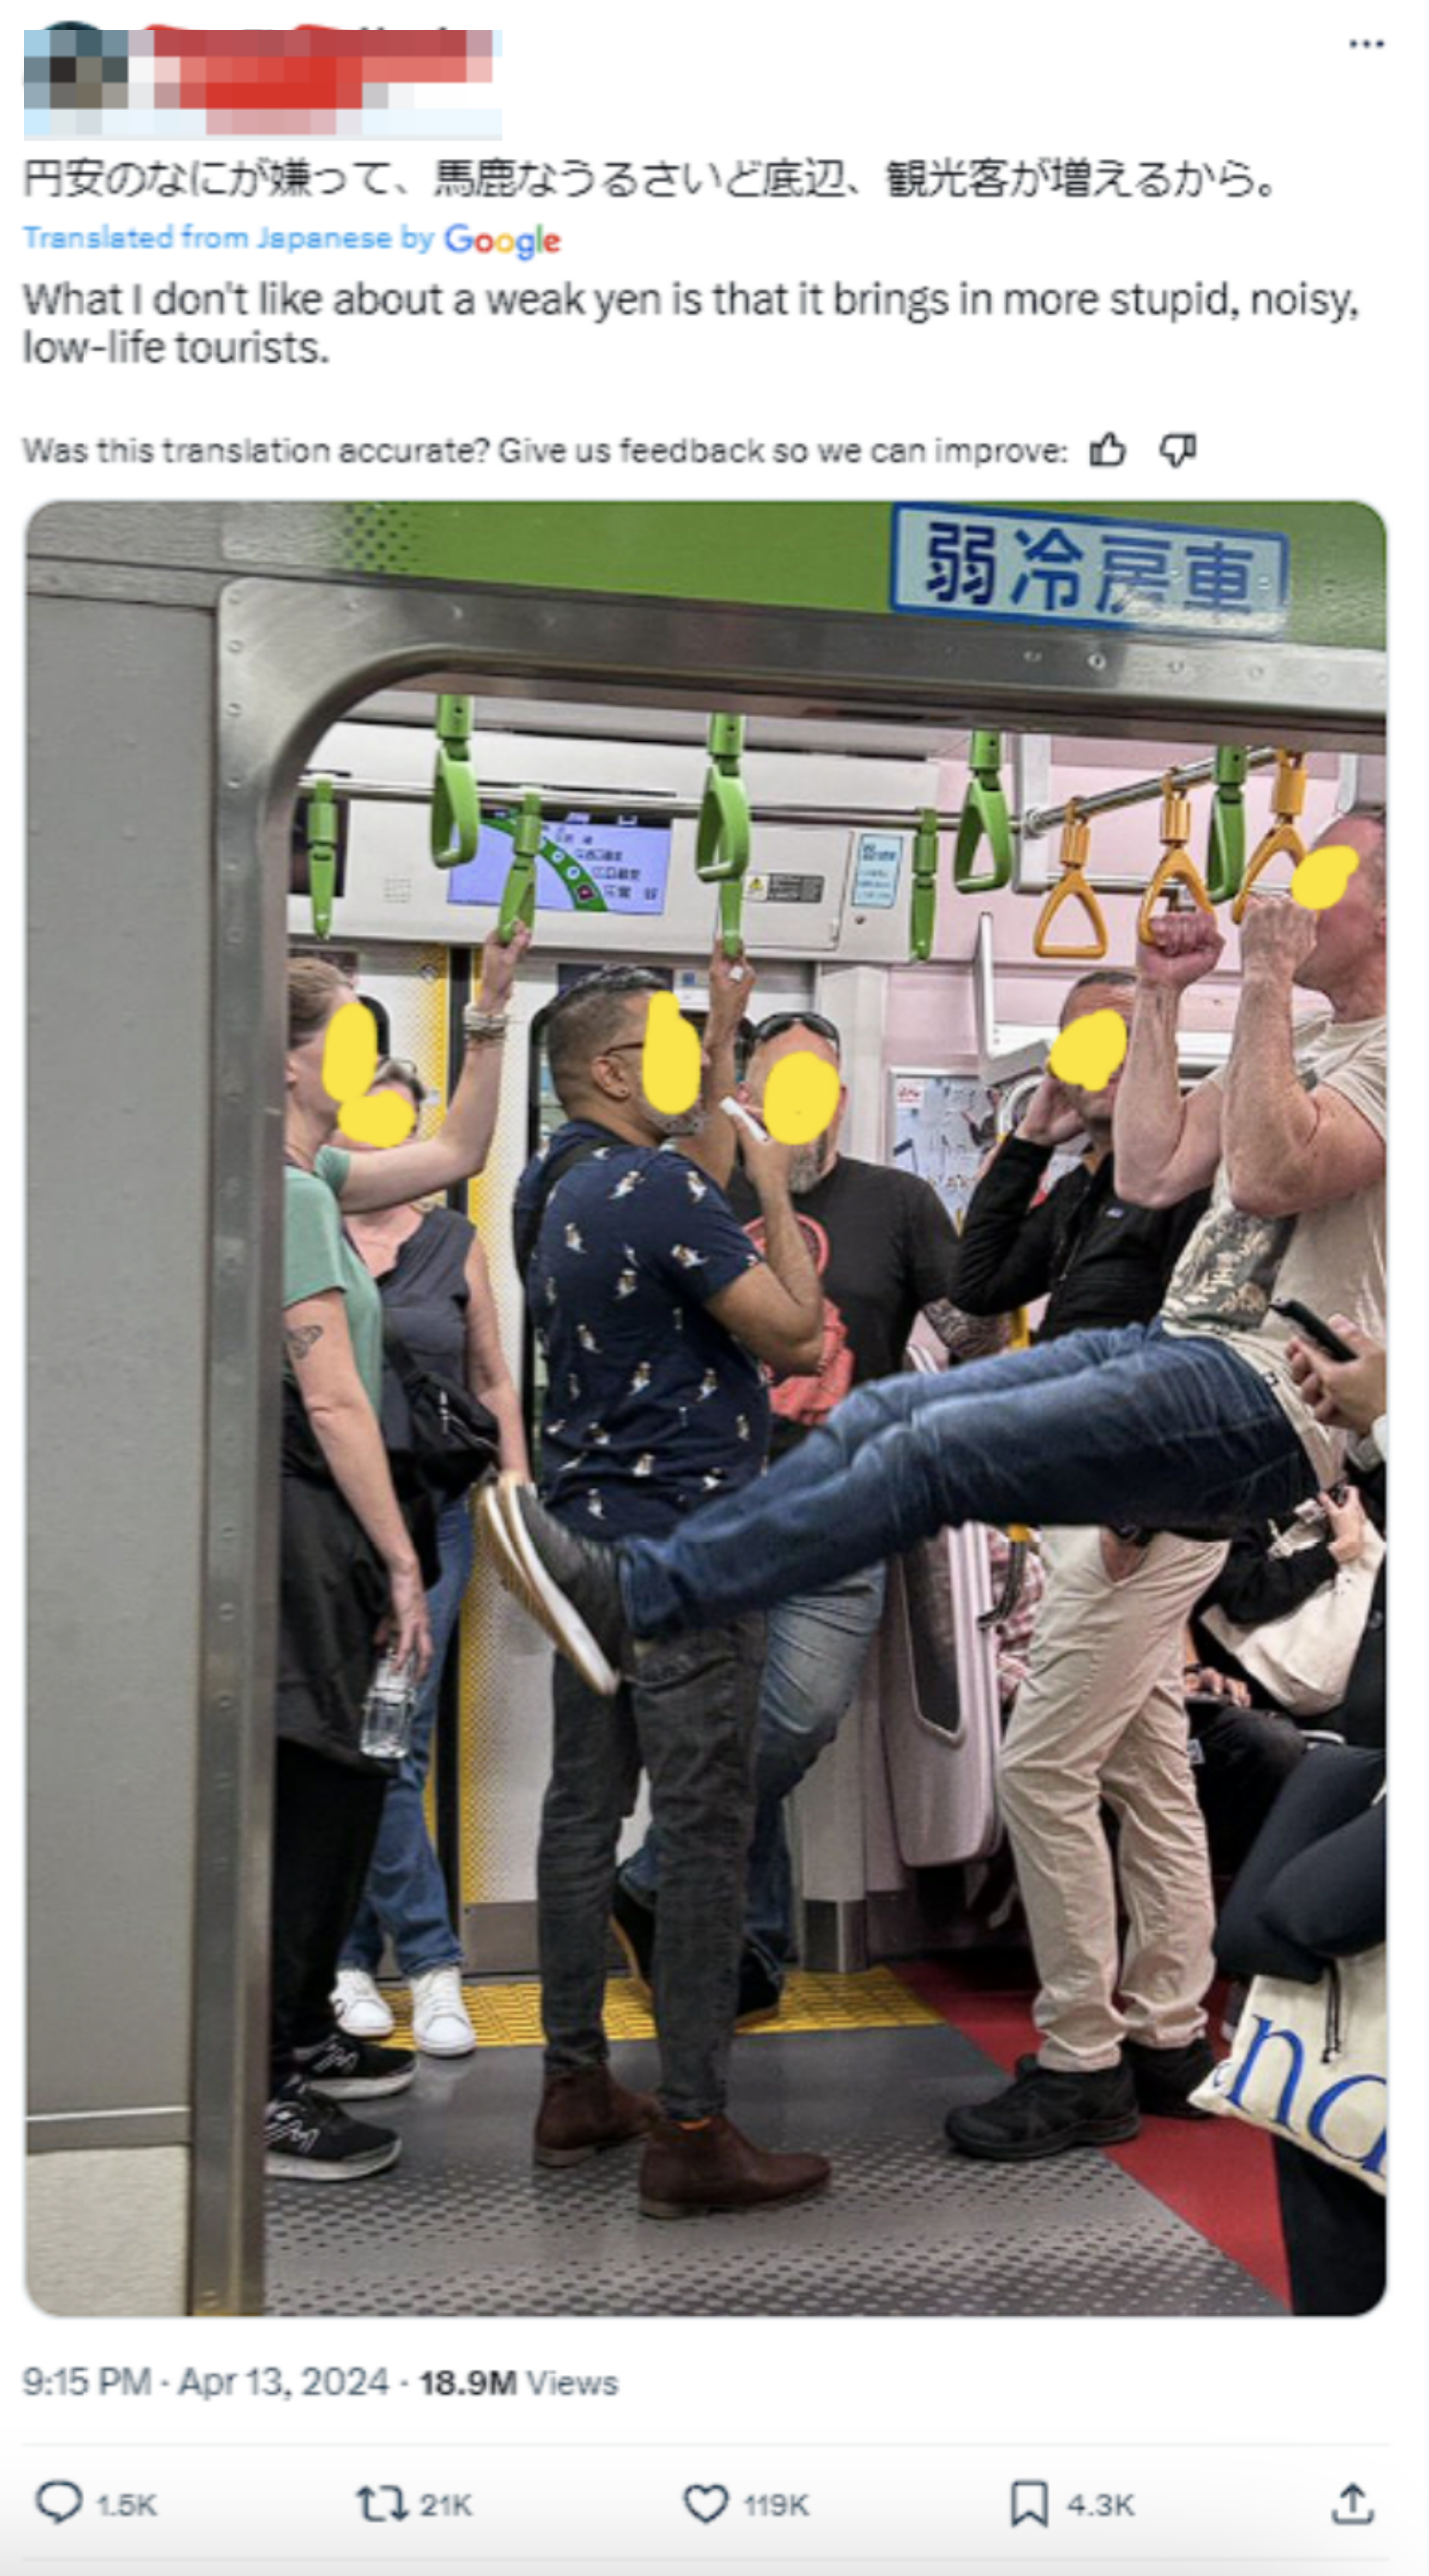 Person performing an acrobatic pose using handrails on a crowded train